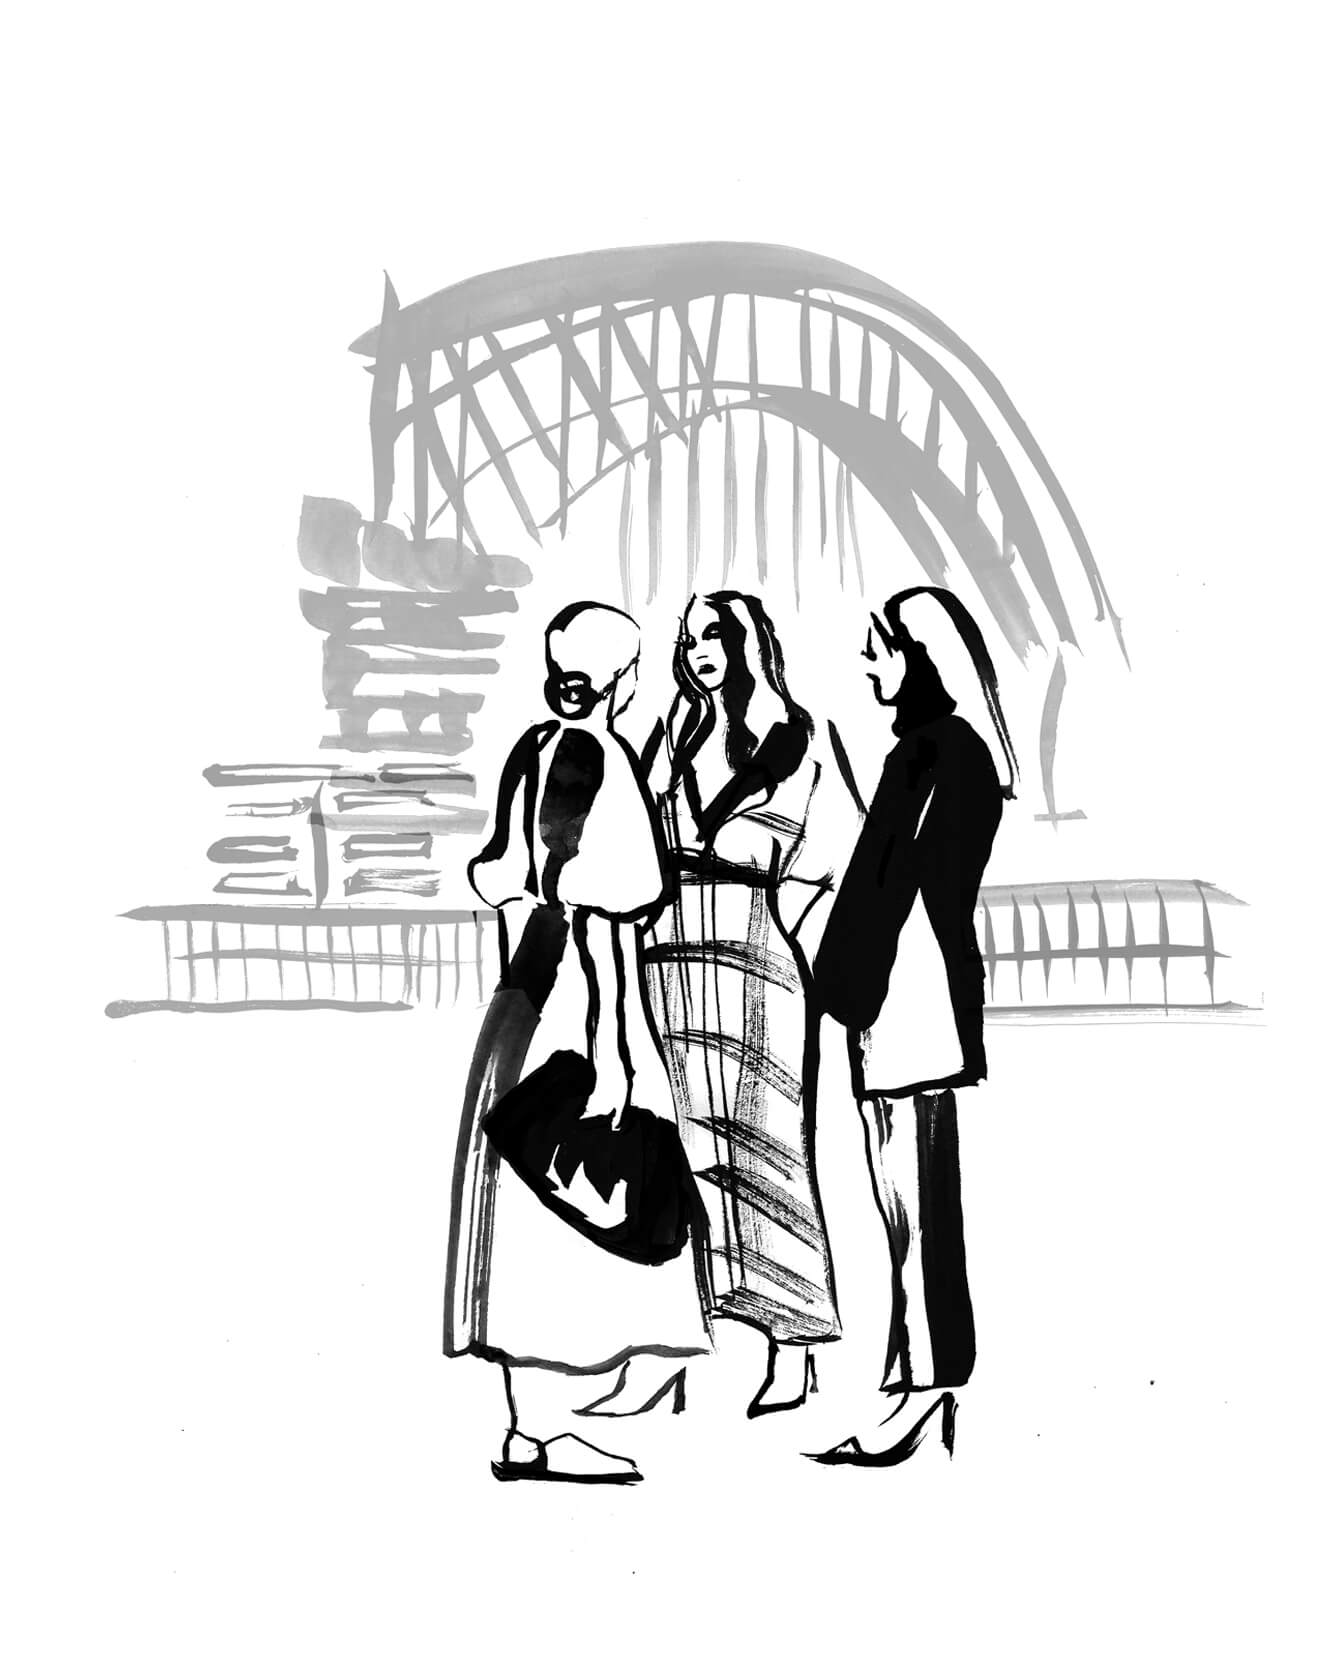 A group of women illustrated at Sydney fashion week with Sydney harbour in the background. Drawn in inky fashion illustration style by Caroline Tomlinson.